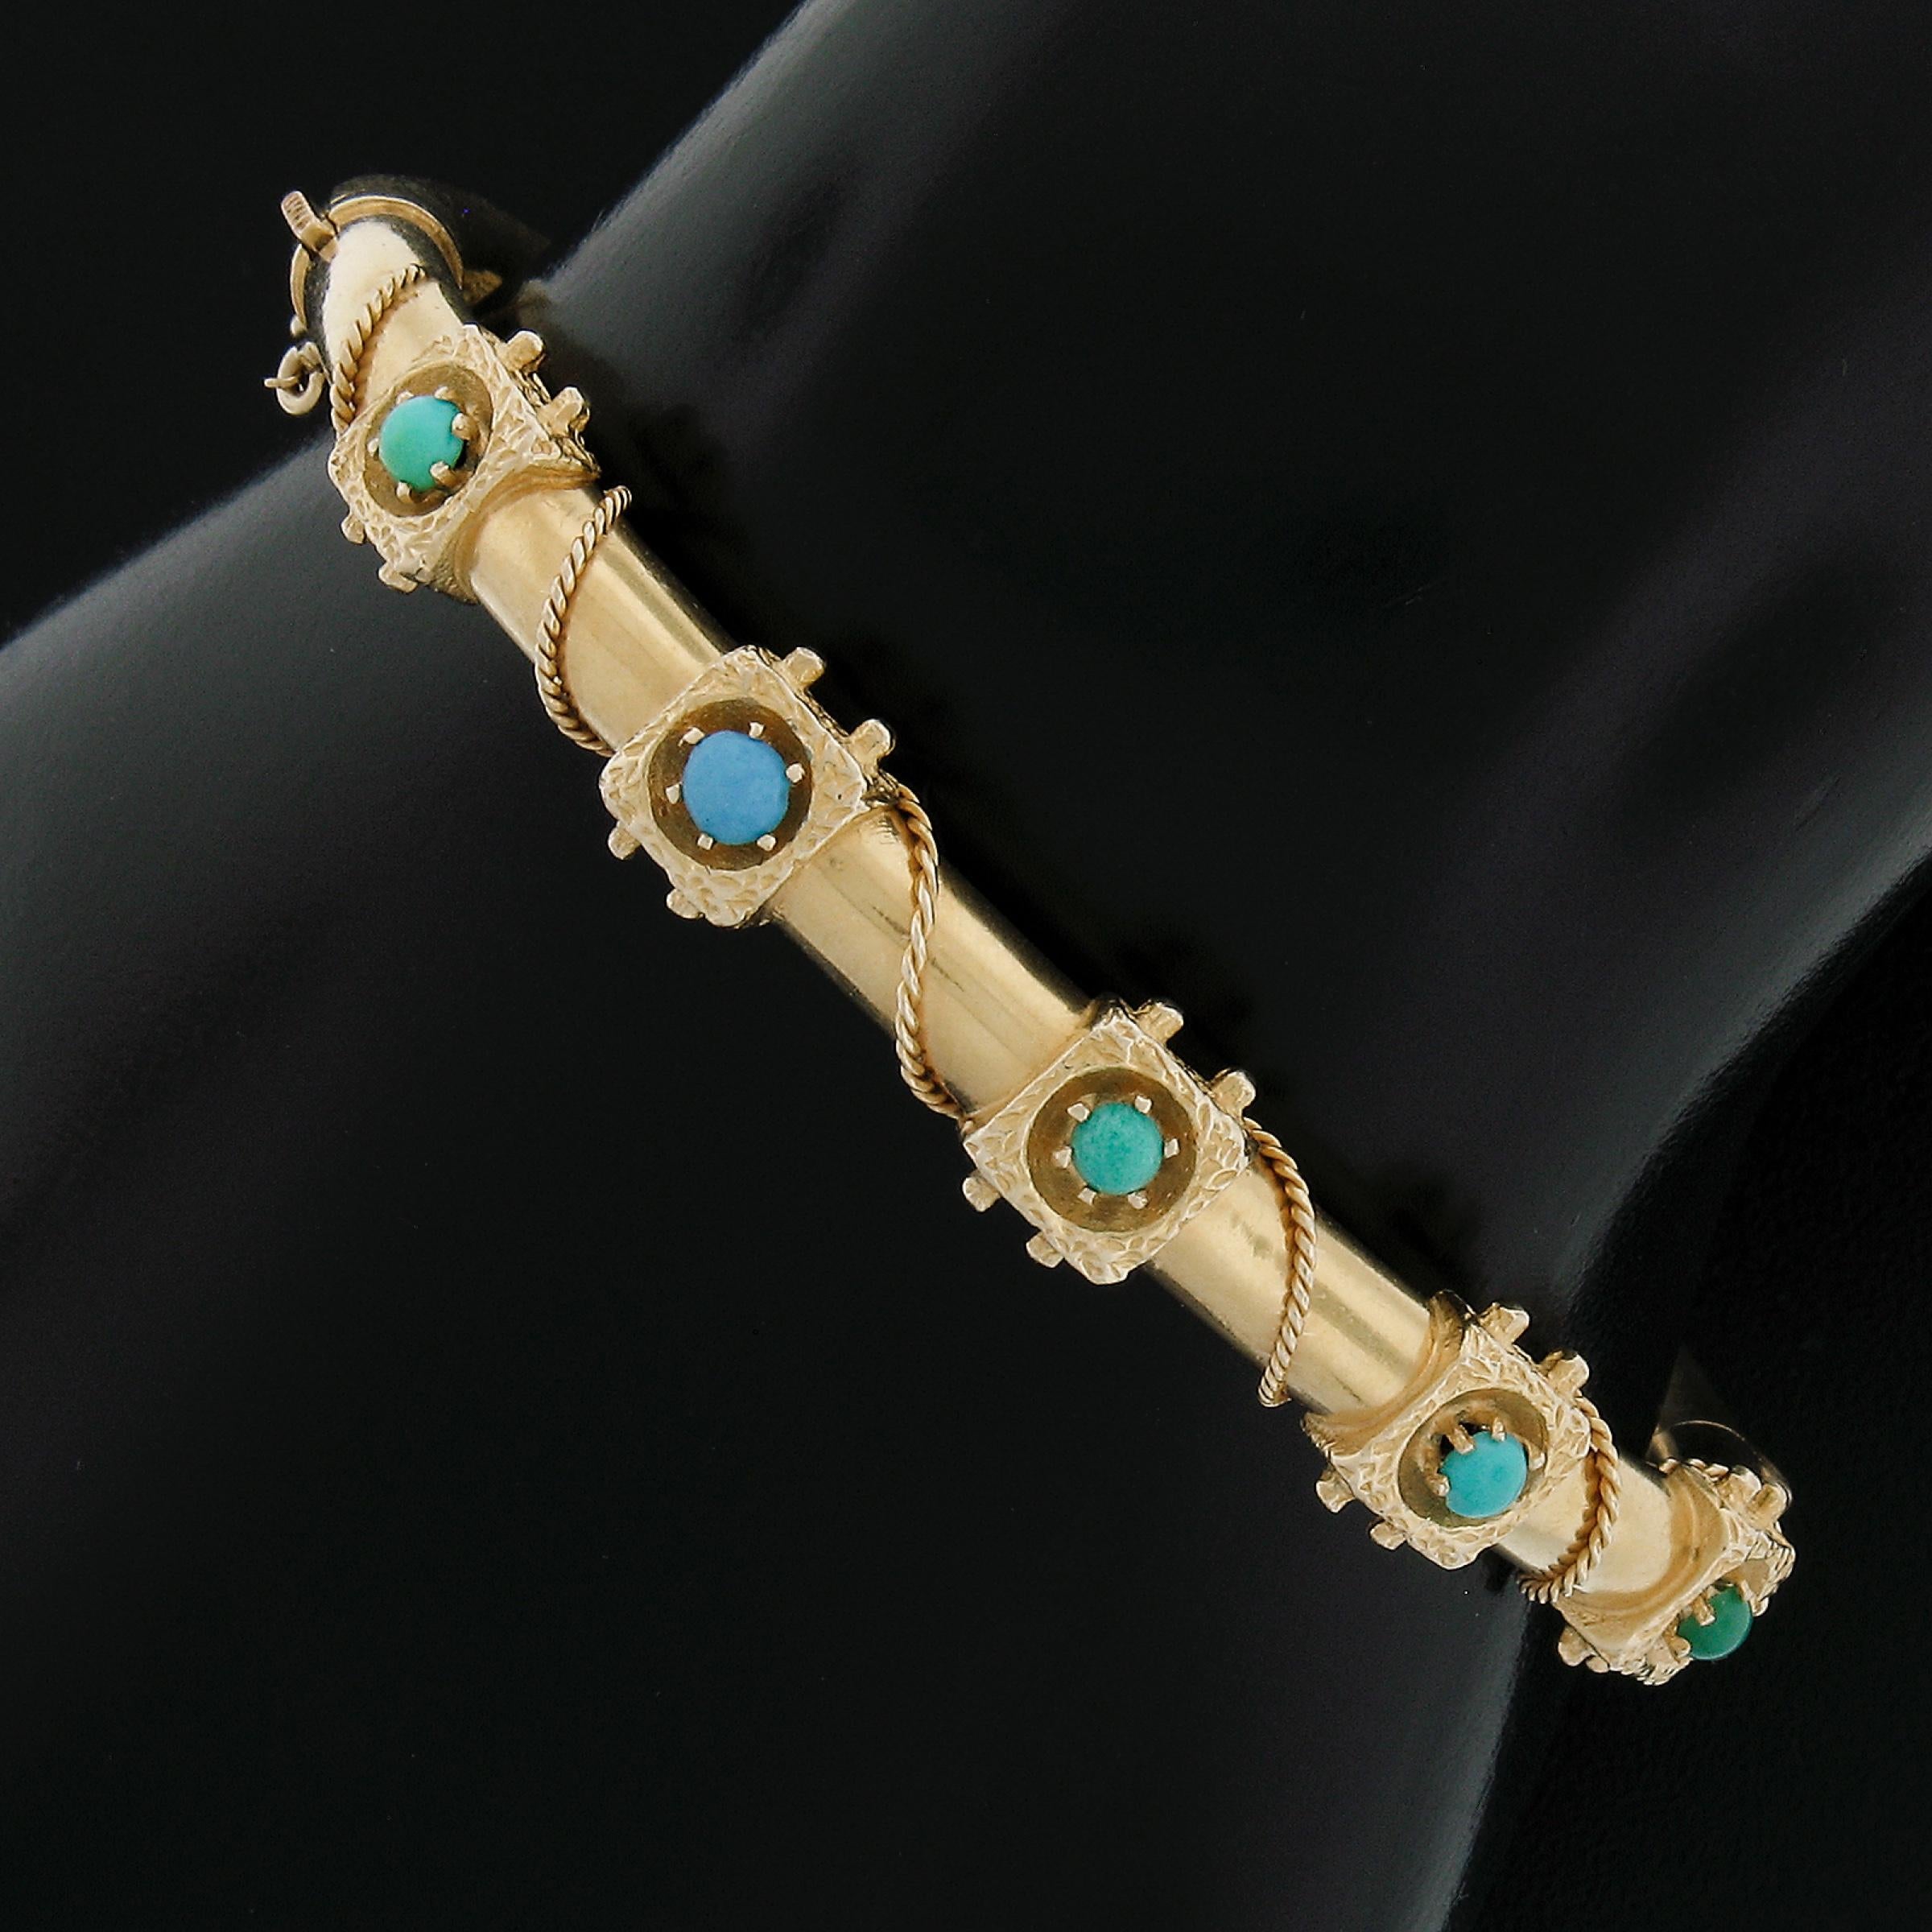 --Stone(s):--
(5) Natural Genuine Turquoise - Round Cabochon Cut - Prong Set - Natural Variation in Colors - 2.6mm to 3.1mm (approx.) 

Material: 14k Solid Yellow Gold
Weight: 12.74 Grams
Chain Length:	Will fit up to a 6.5 inch wrist (inside